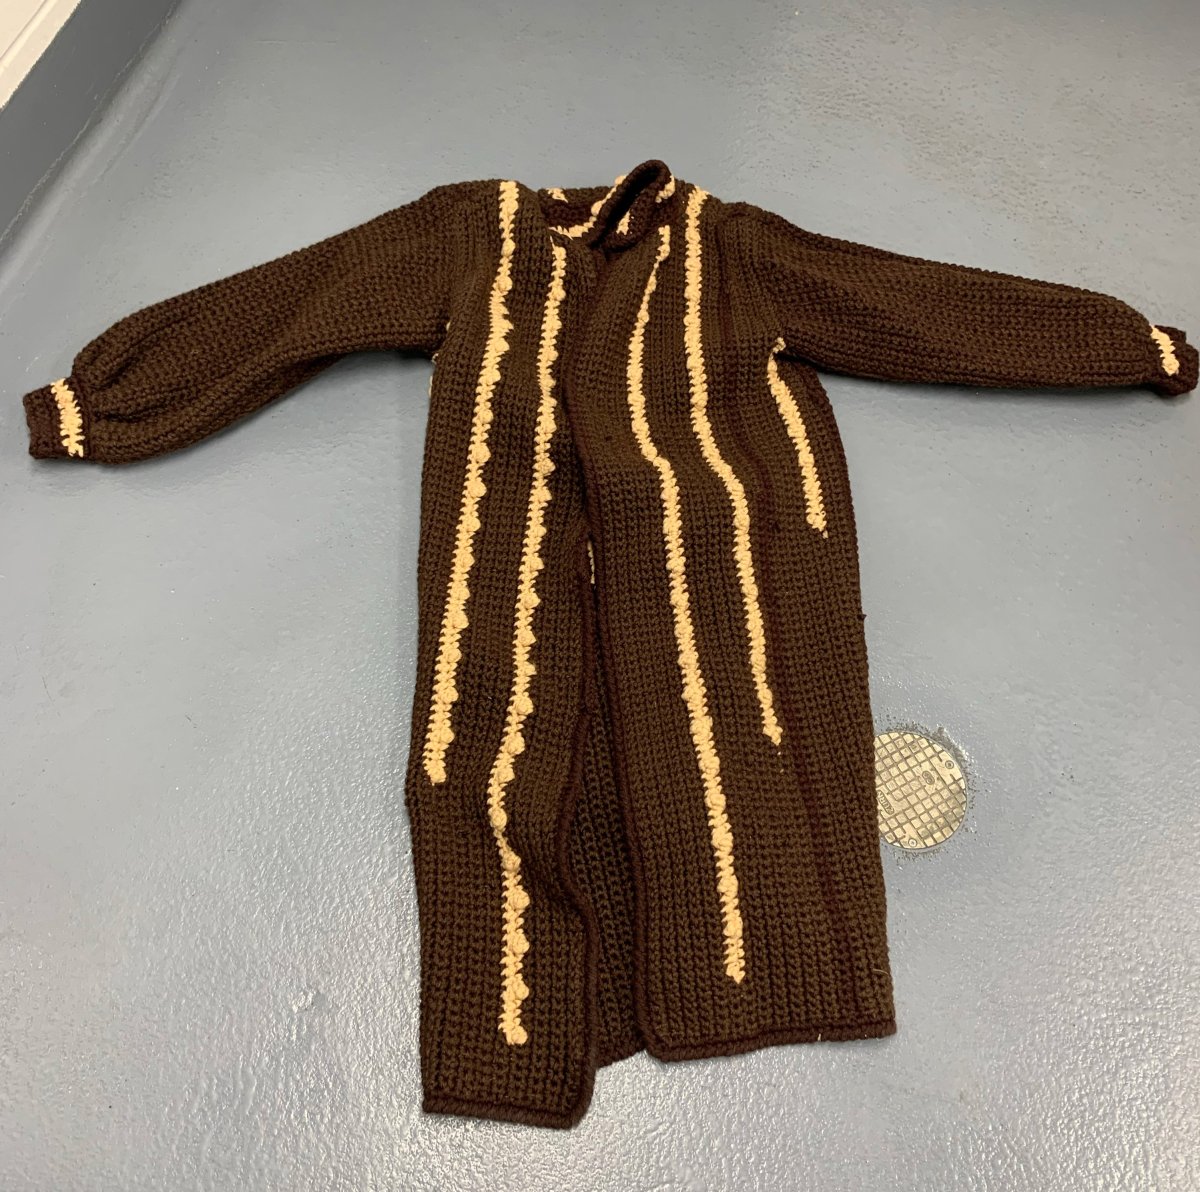 Knitted three-quarter-length coat believed to be stolen.